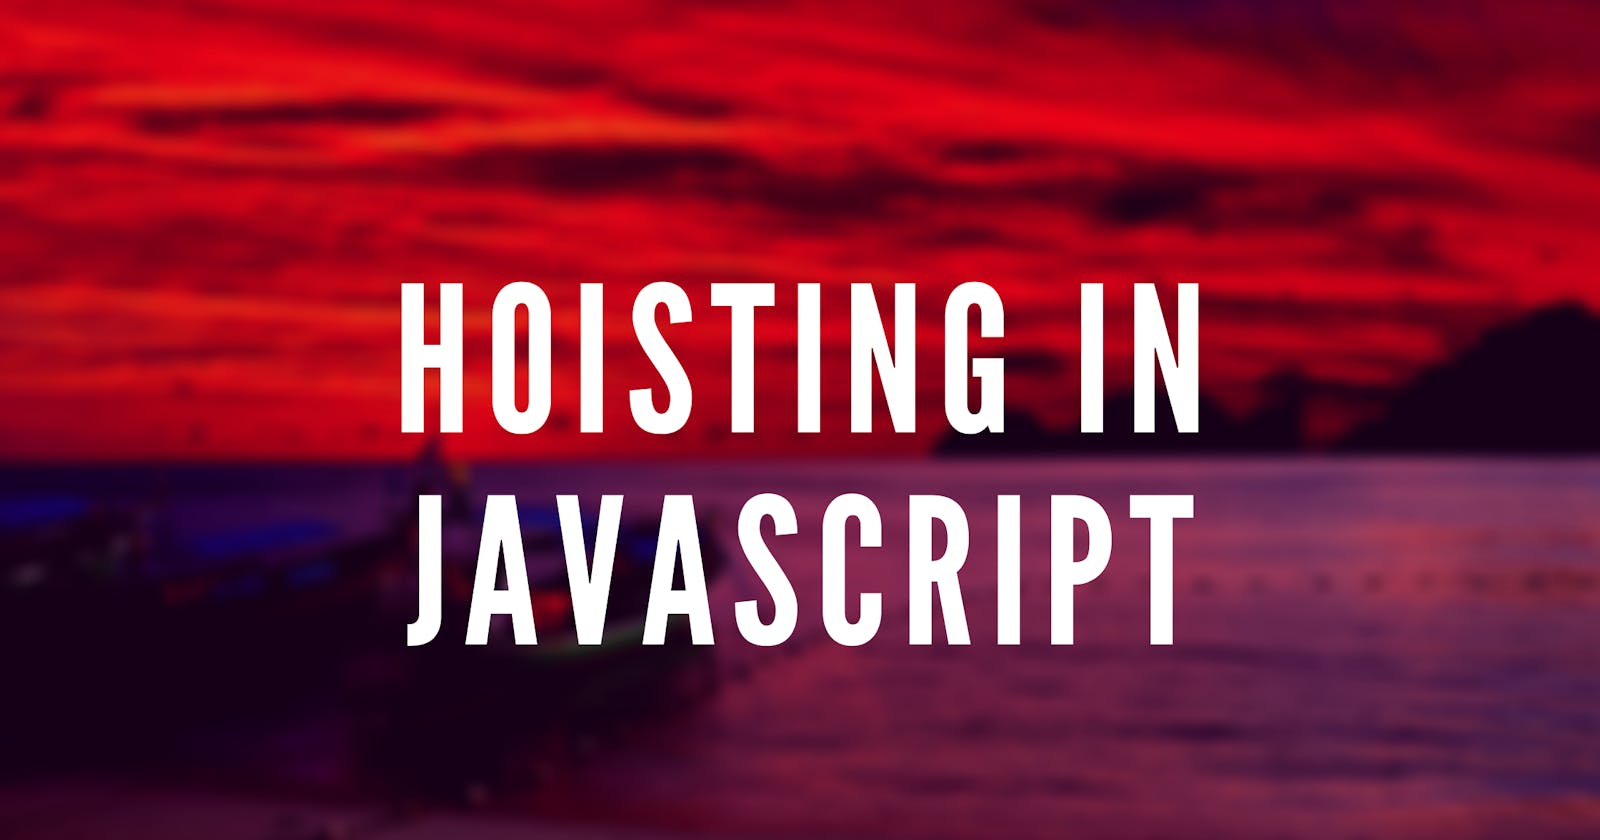 But, can you explain Hoisting in Javascript with examples?